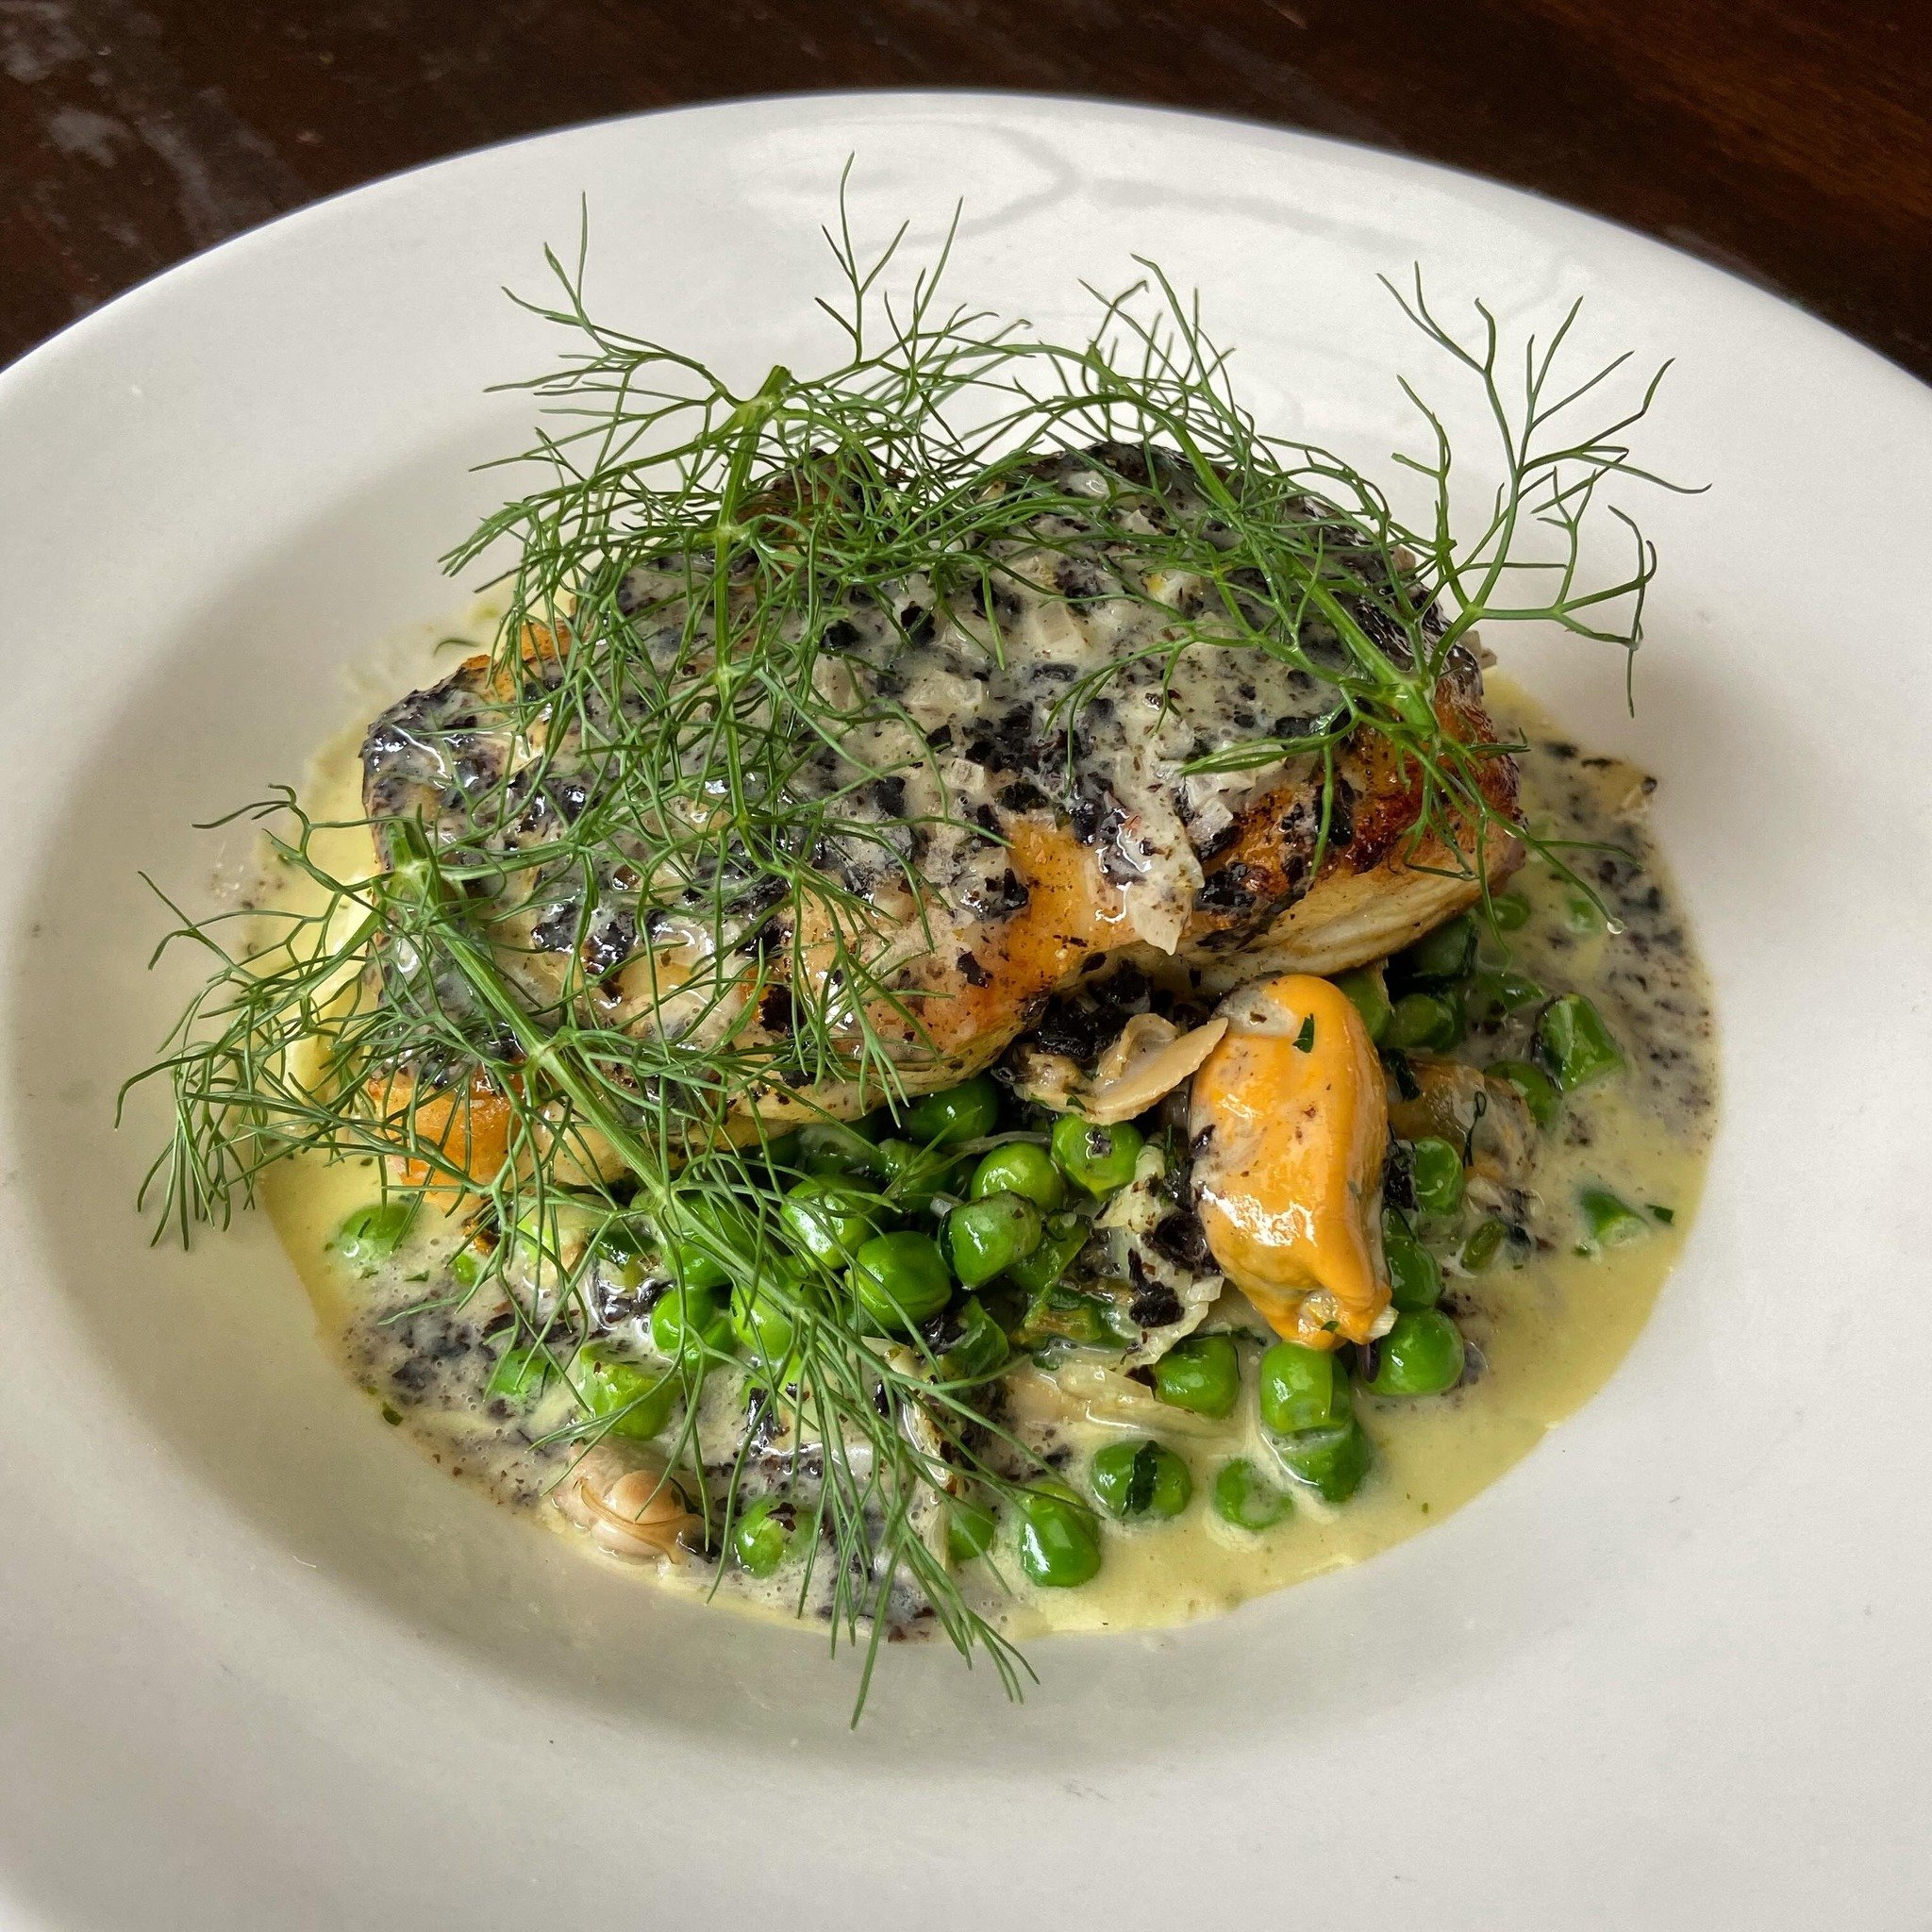 Le Poisson du March&eacute;- halibut with a nori beurre blanc, mussels, clams, peas, and asparagus! 
Tested and approved by the staff. 
#poissondumarch&eacute; #frenchfood #frenchcomfortfood #avleats #ashevillerestaurant #avlbouchon #eatlocal